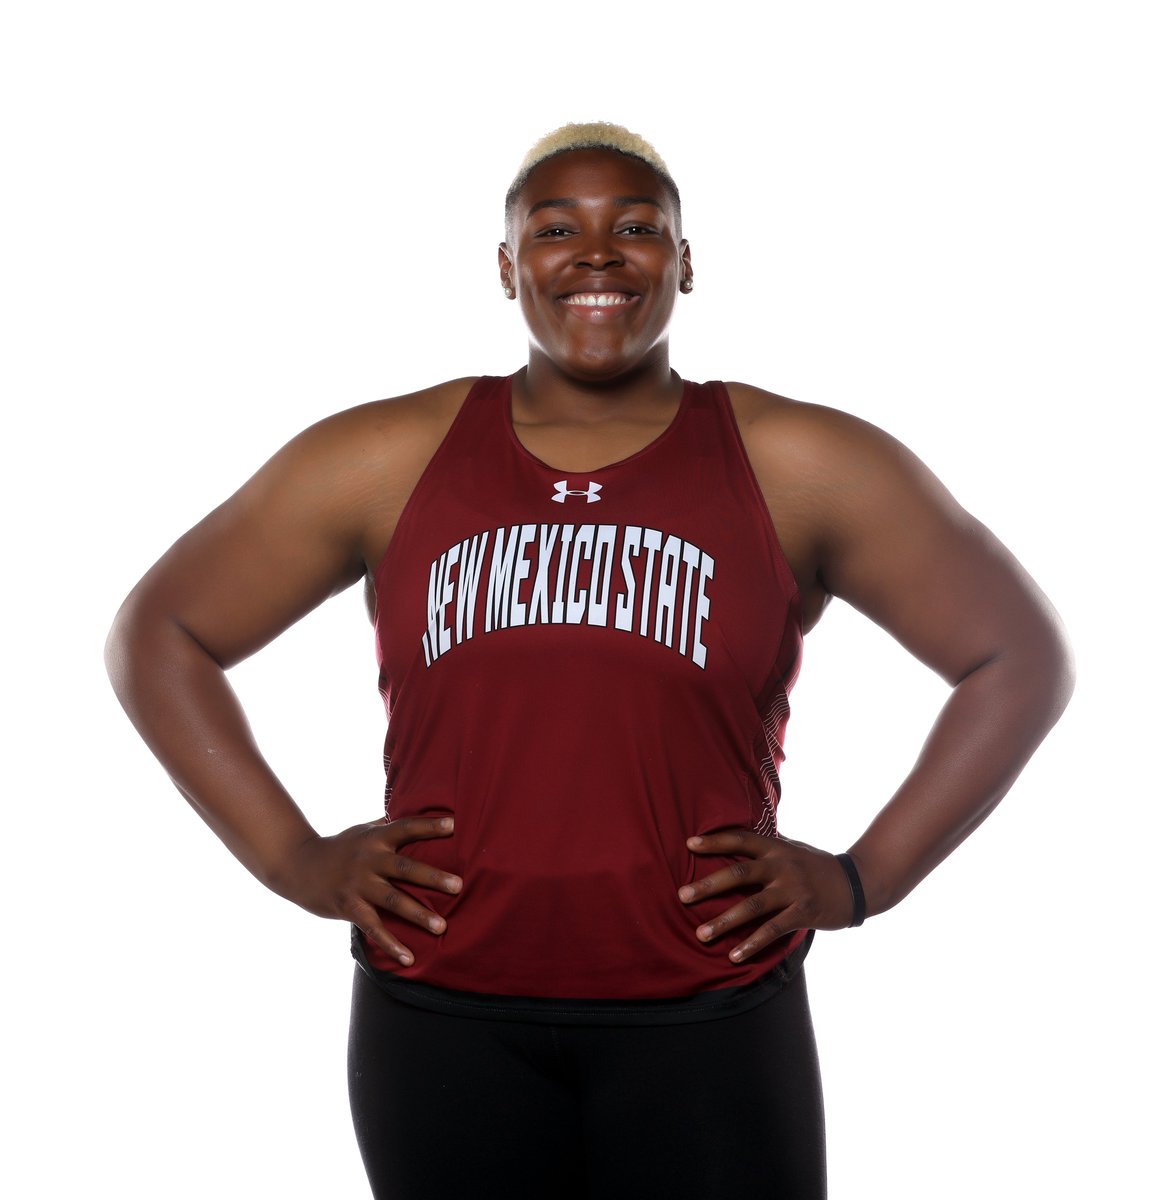 NMStateXCTF tweet picture